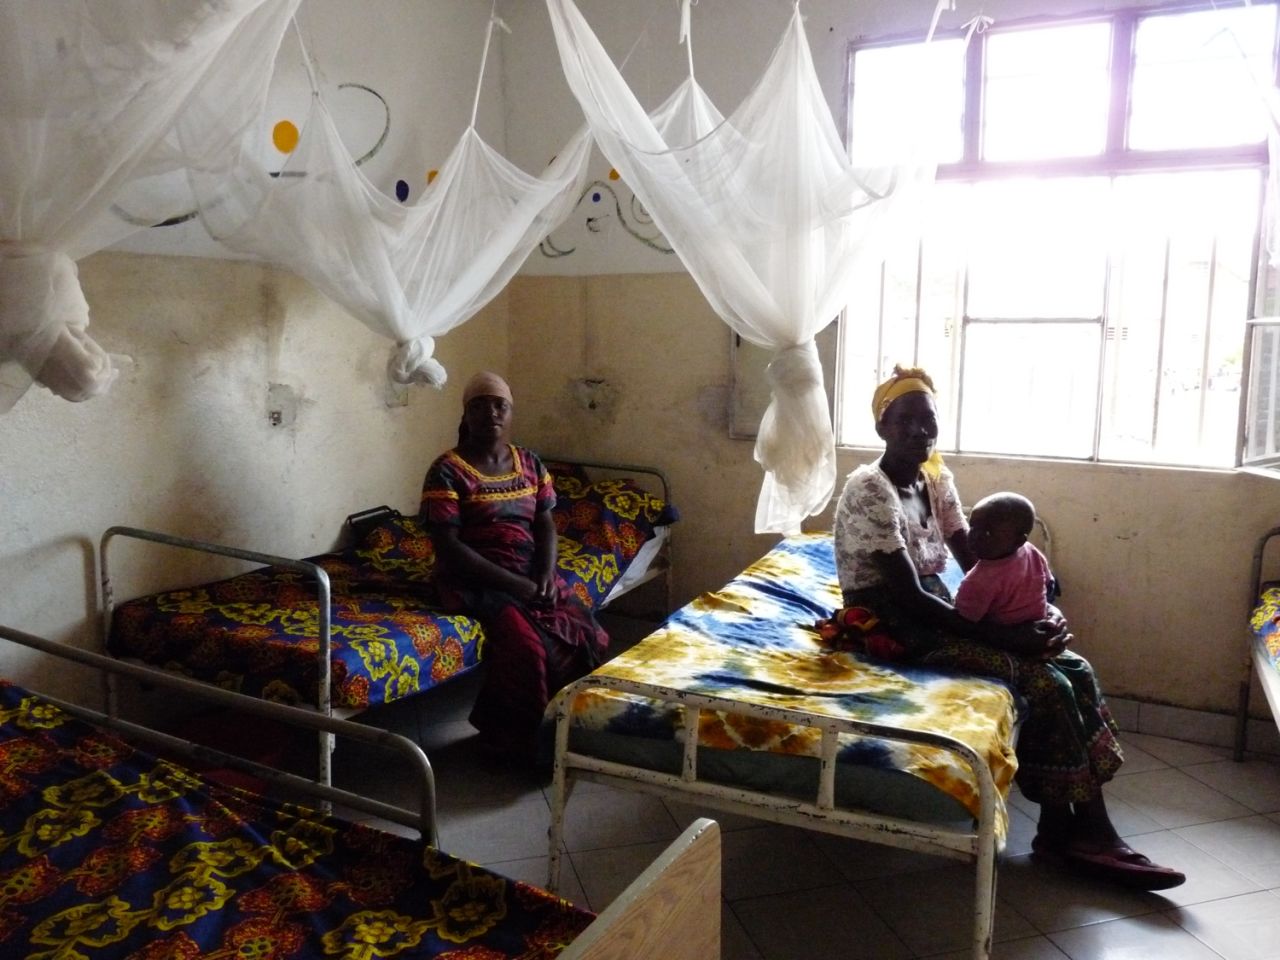 These women have fully recovered and received support through HEAL Africa's Safe Motherhood Program.